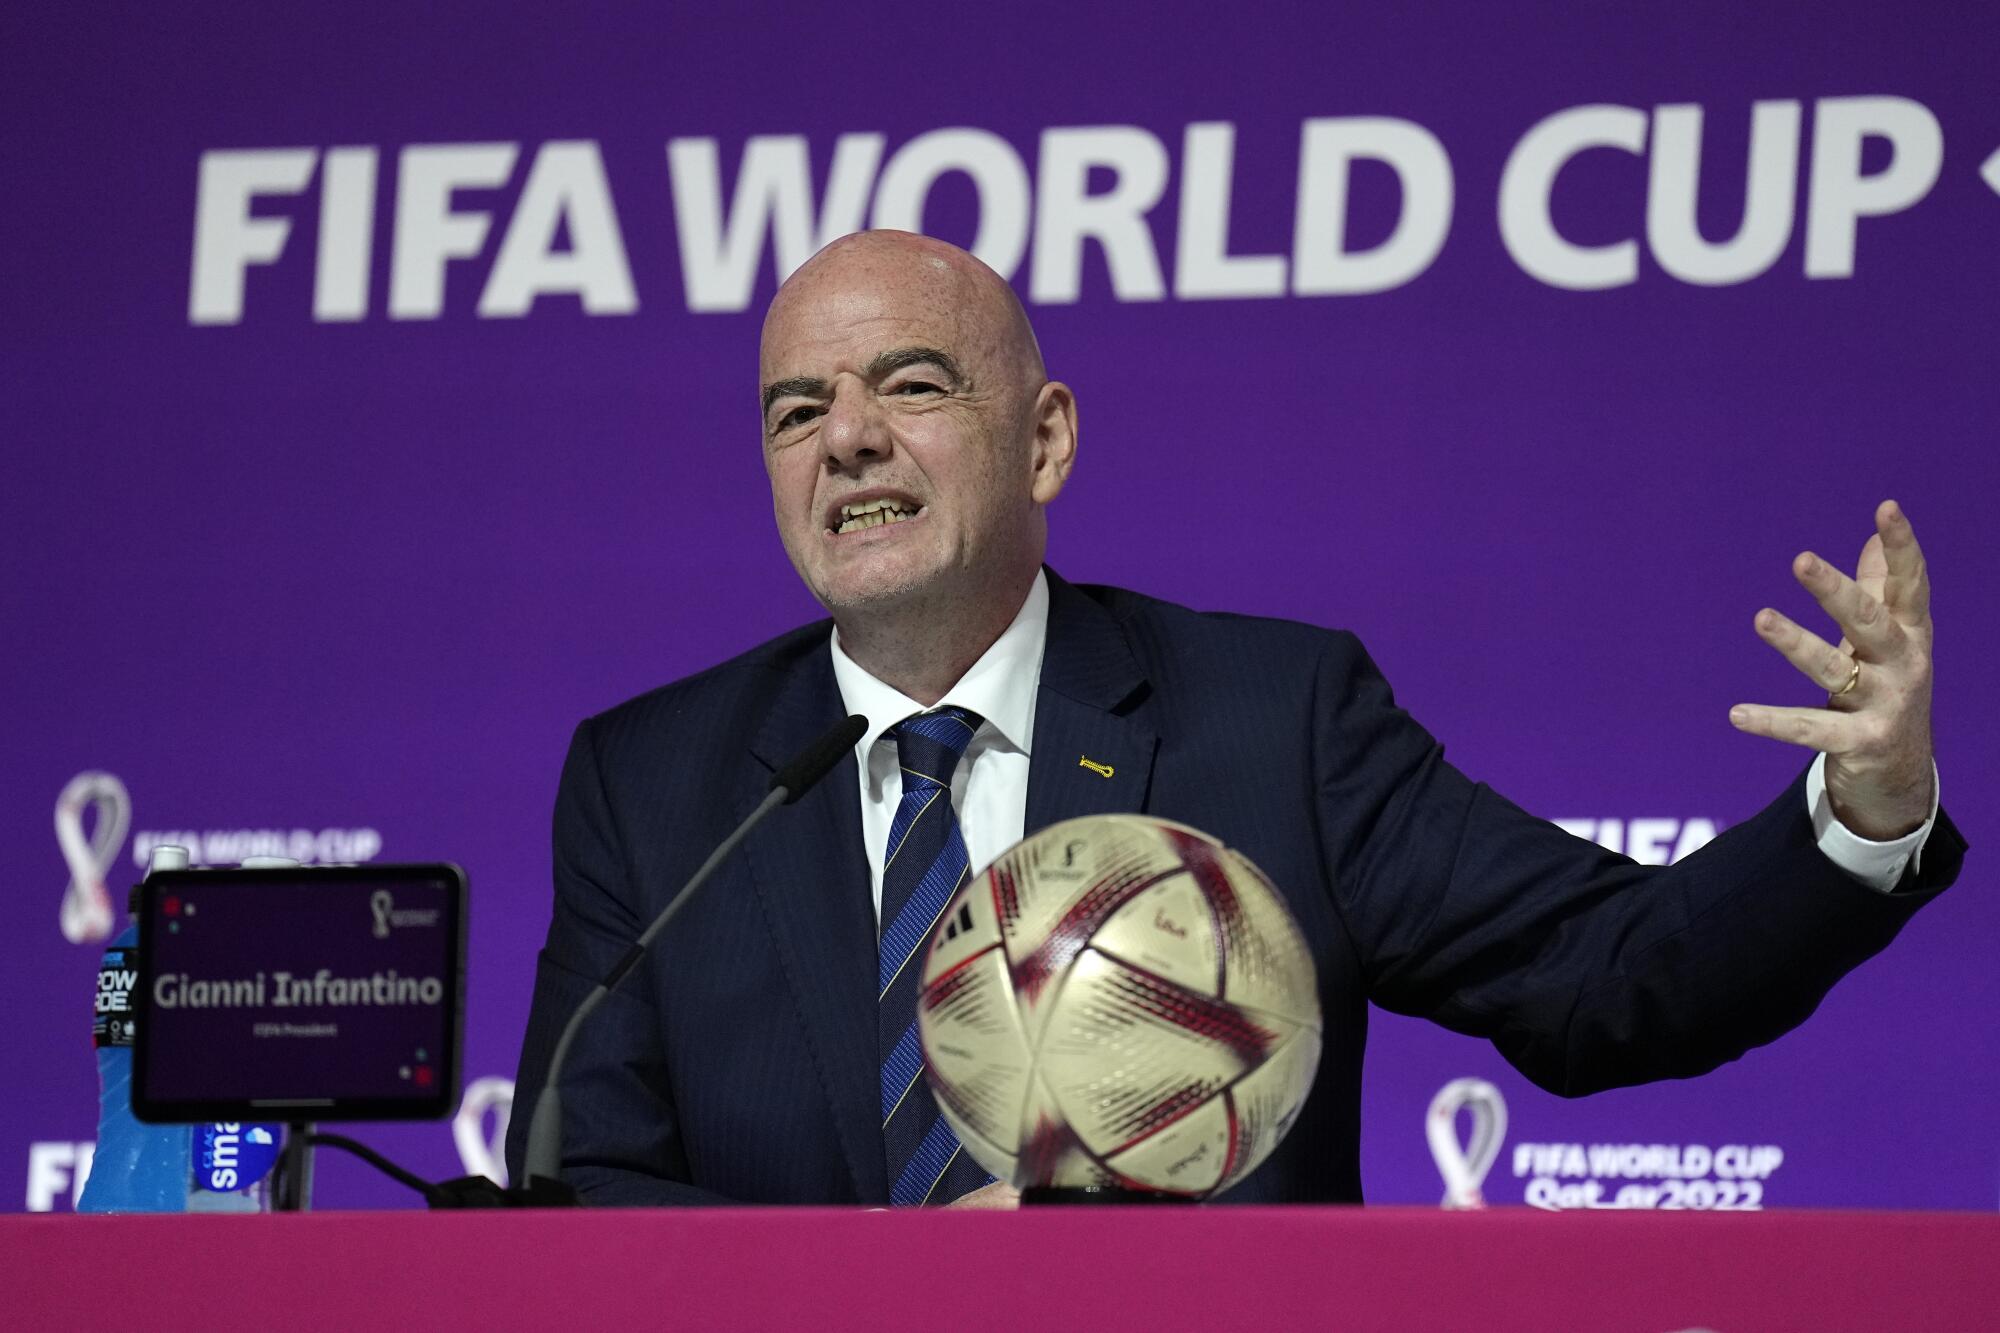 Human rights should be essential to FIFA's choice of World Cup